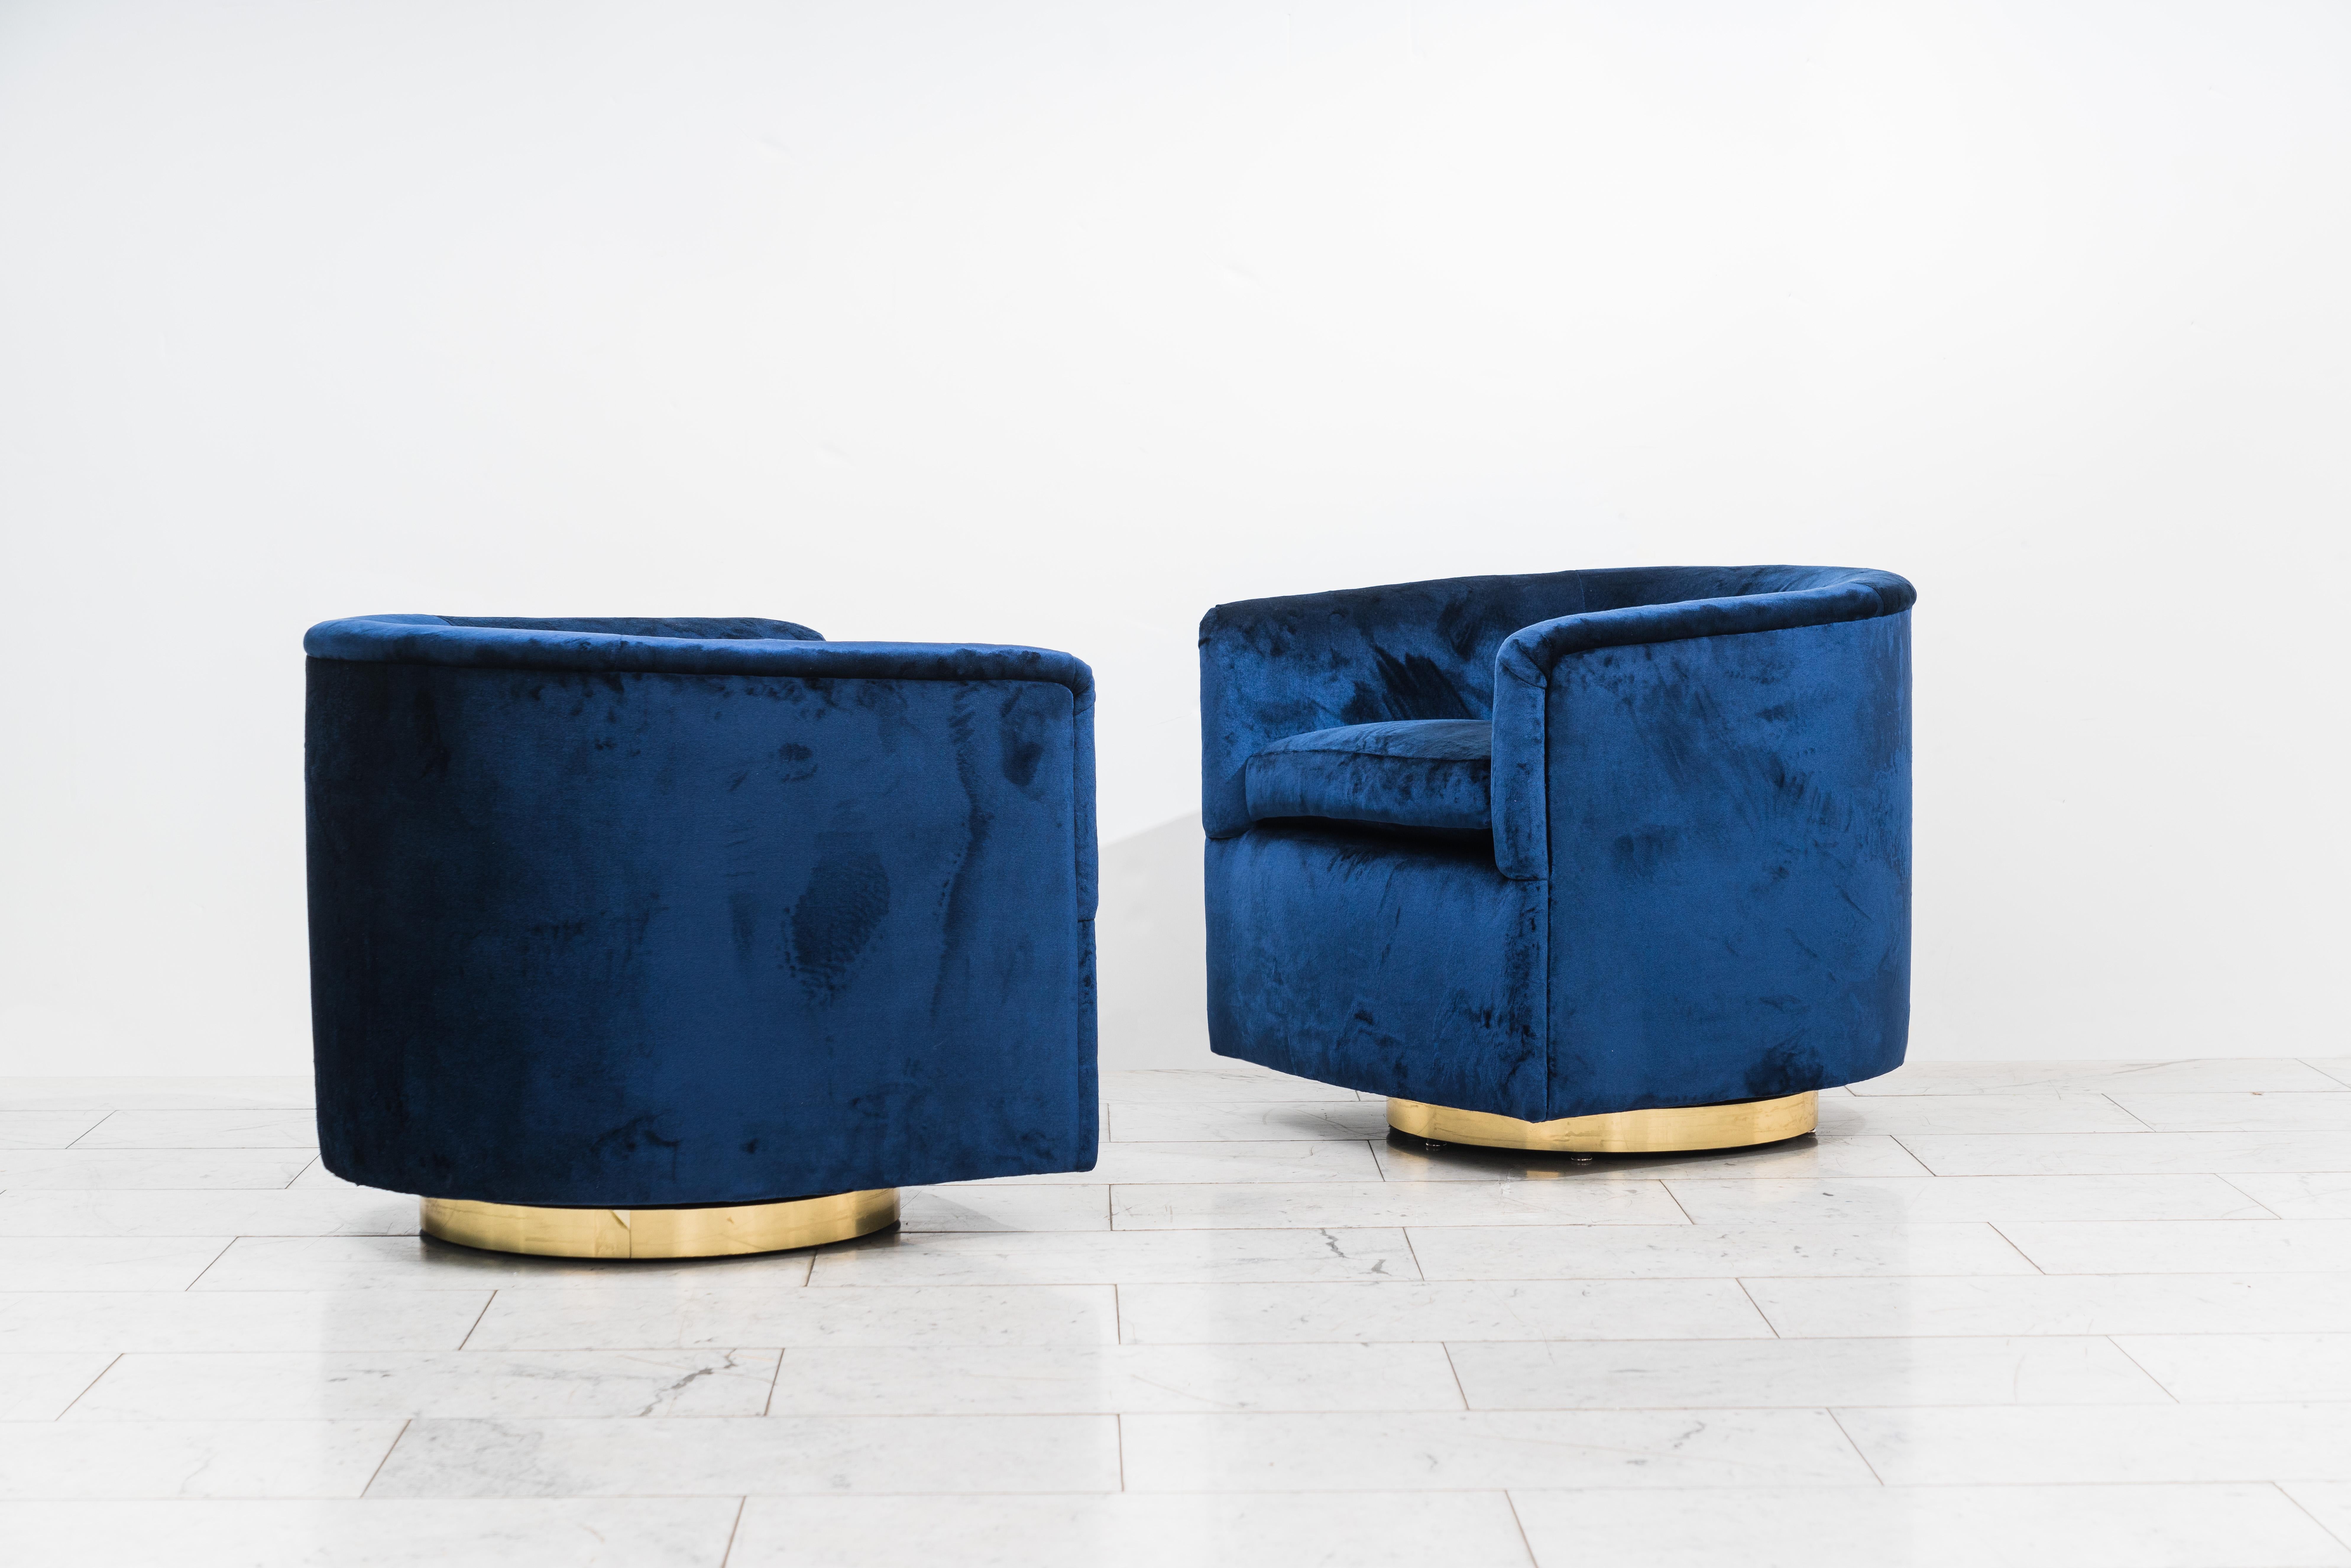 A beautiful pair of swivel chairs designed by Milo Baughman. Each chair has a circular brass base that swivels with ease. Elegant in design, the chairs are also extremely comfortable, offering wonderful back support. Excellent condition.